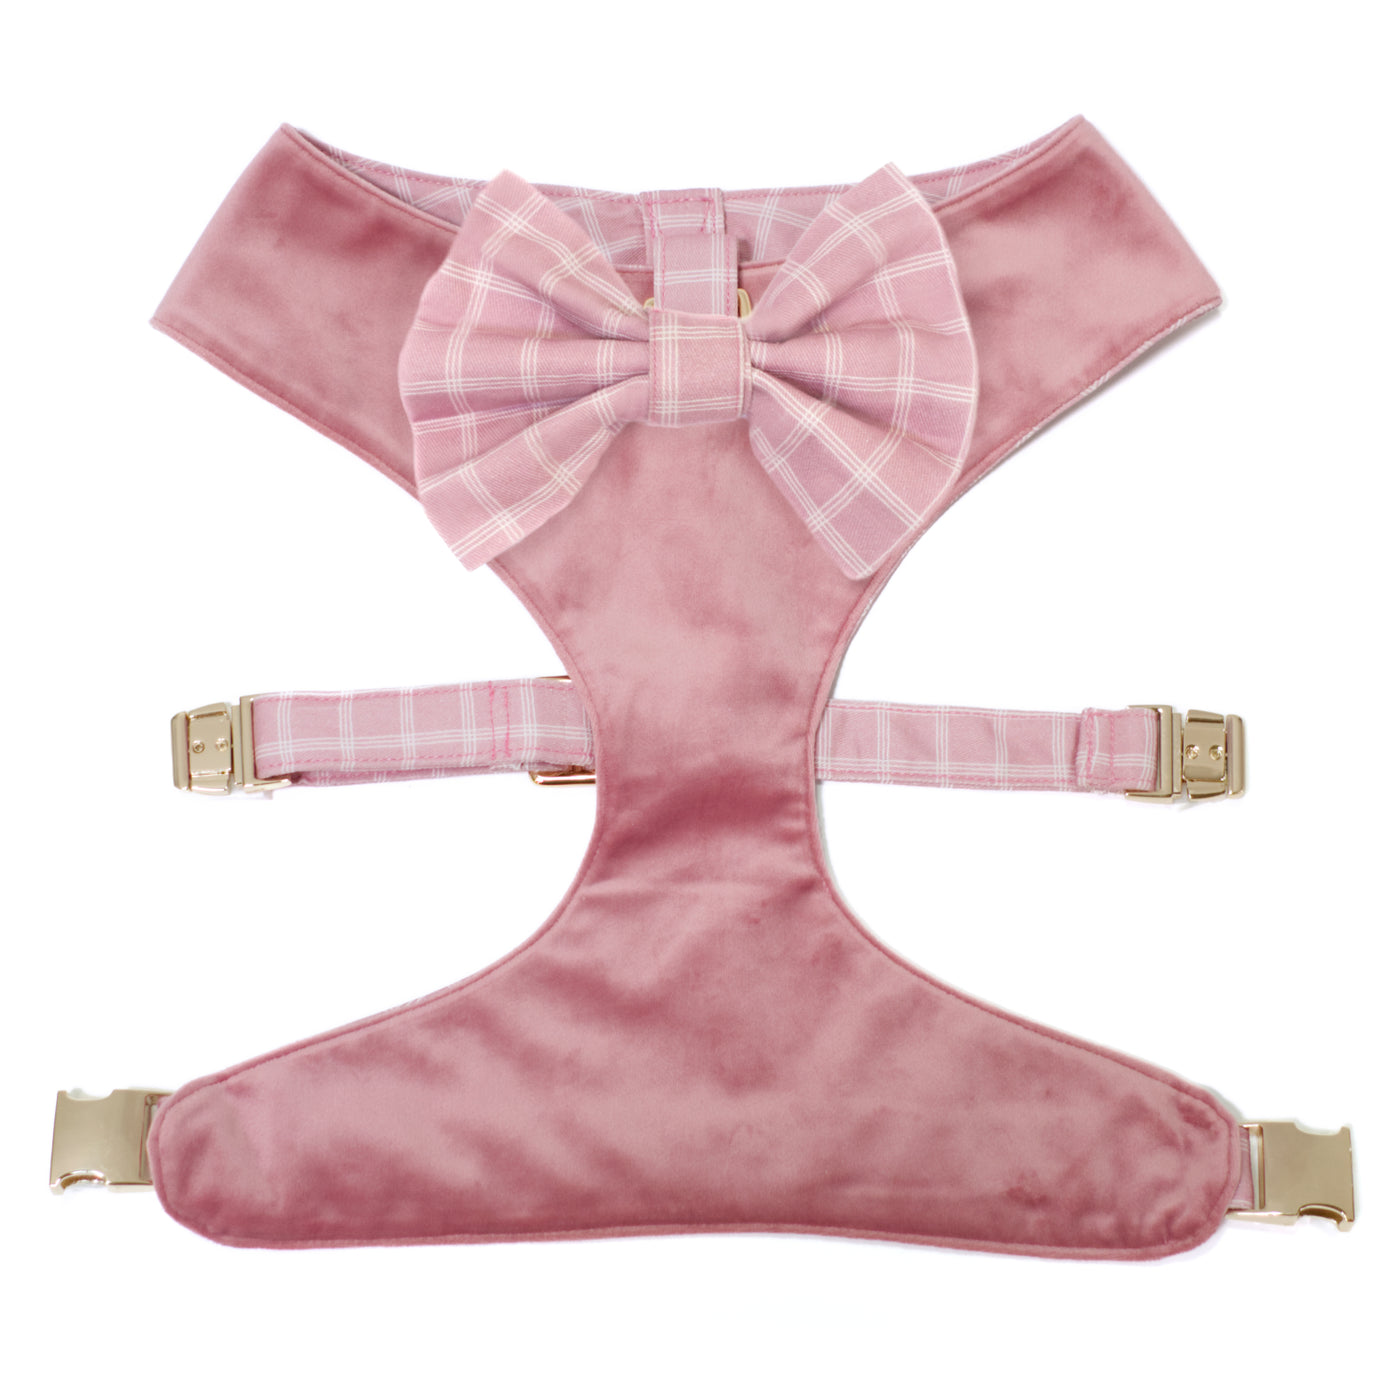 Rose pink reversible velvet harness with gold hardware and windowpane plaid classic dog bow tie